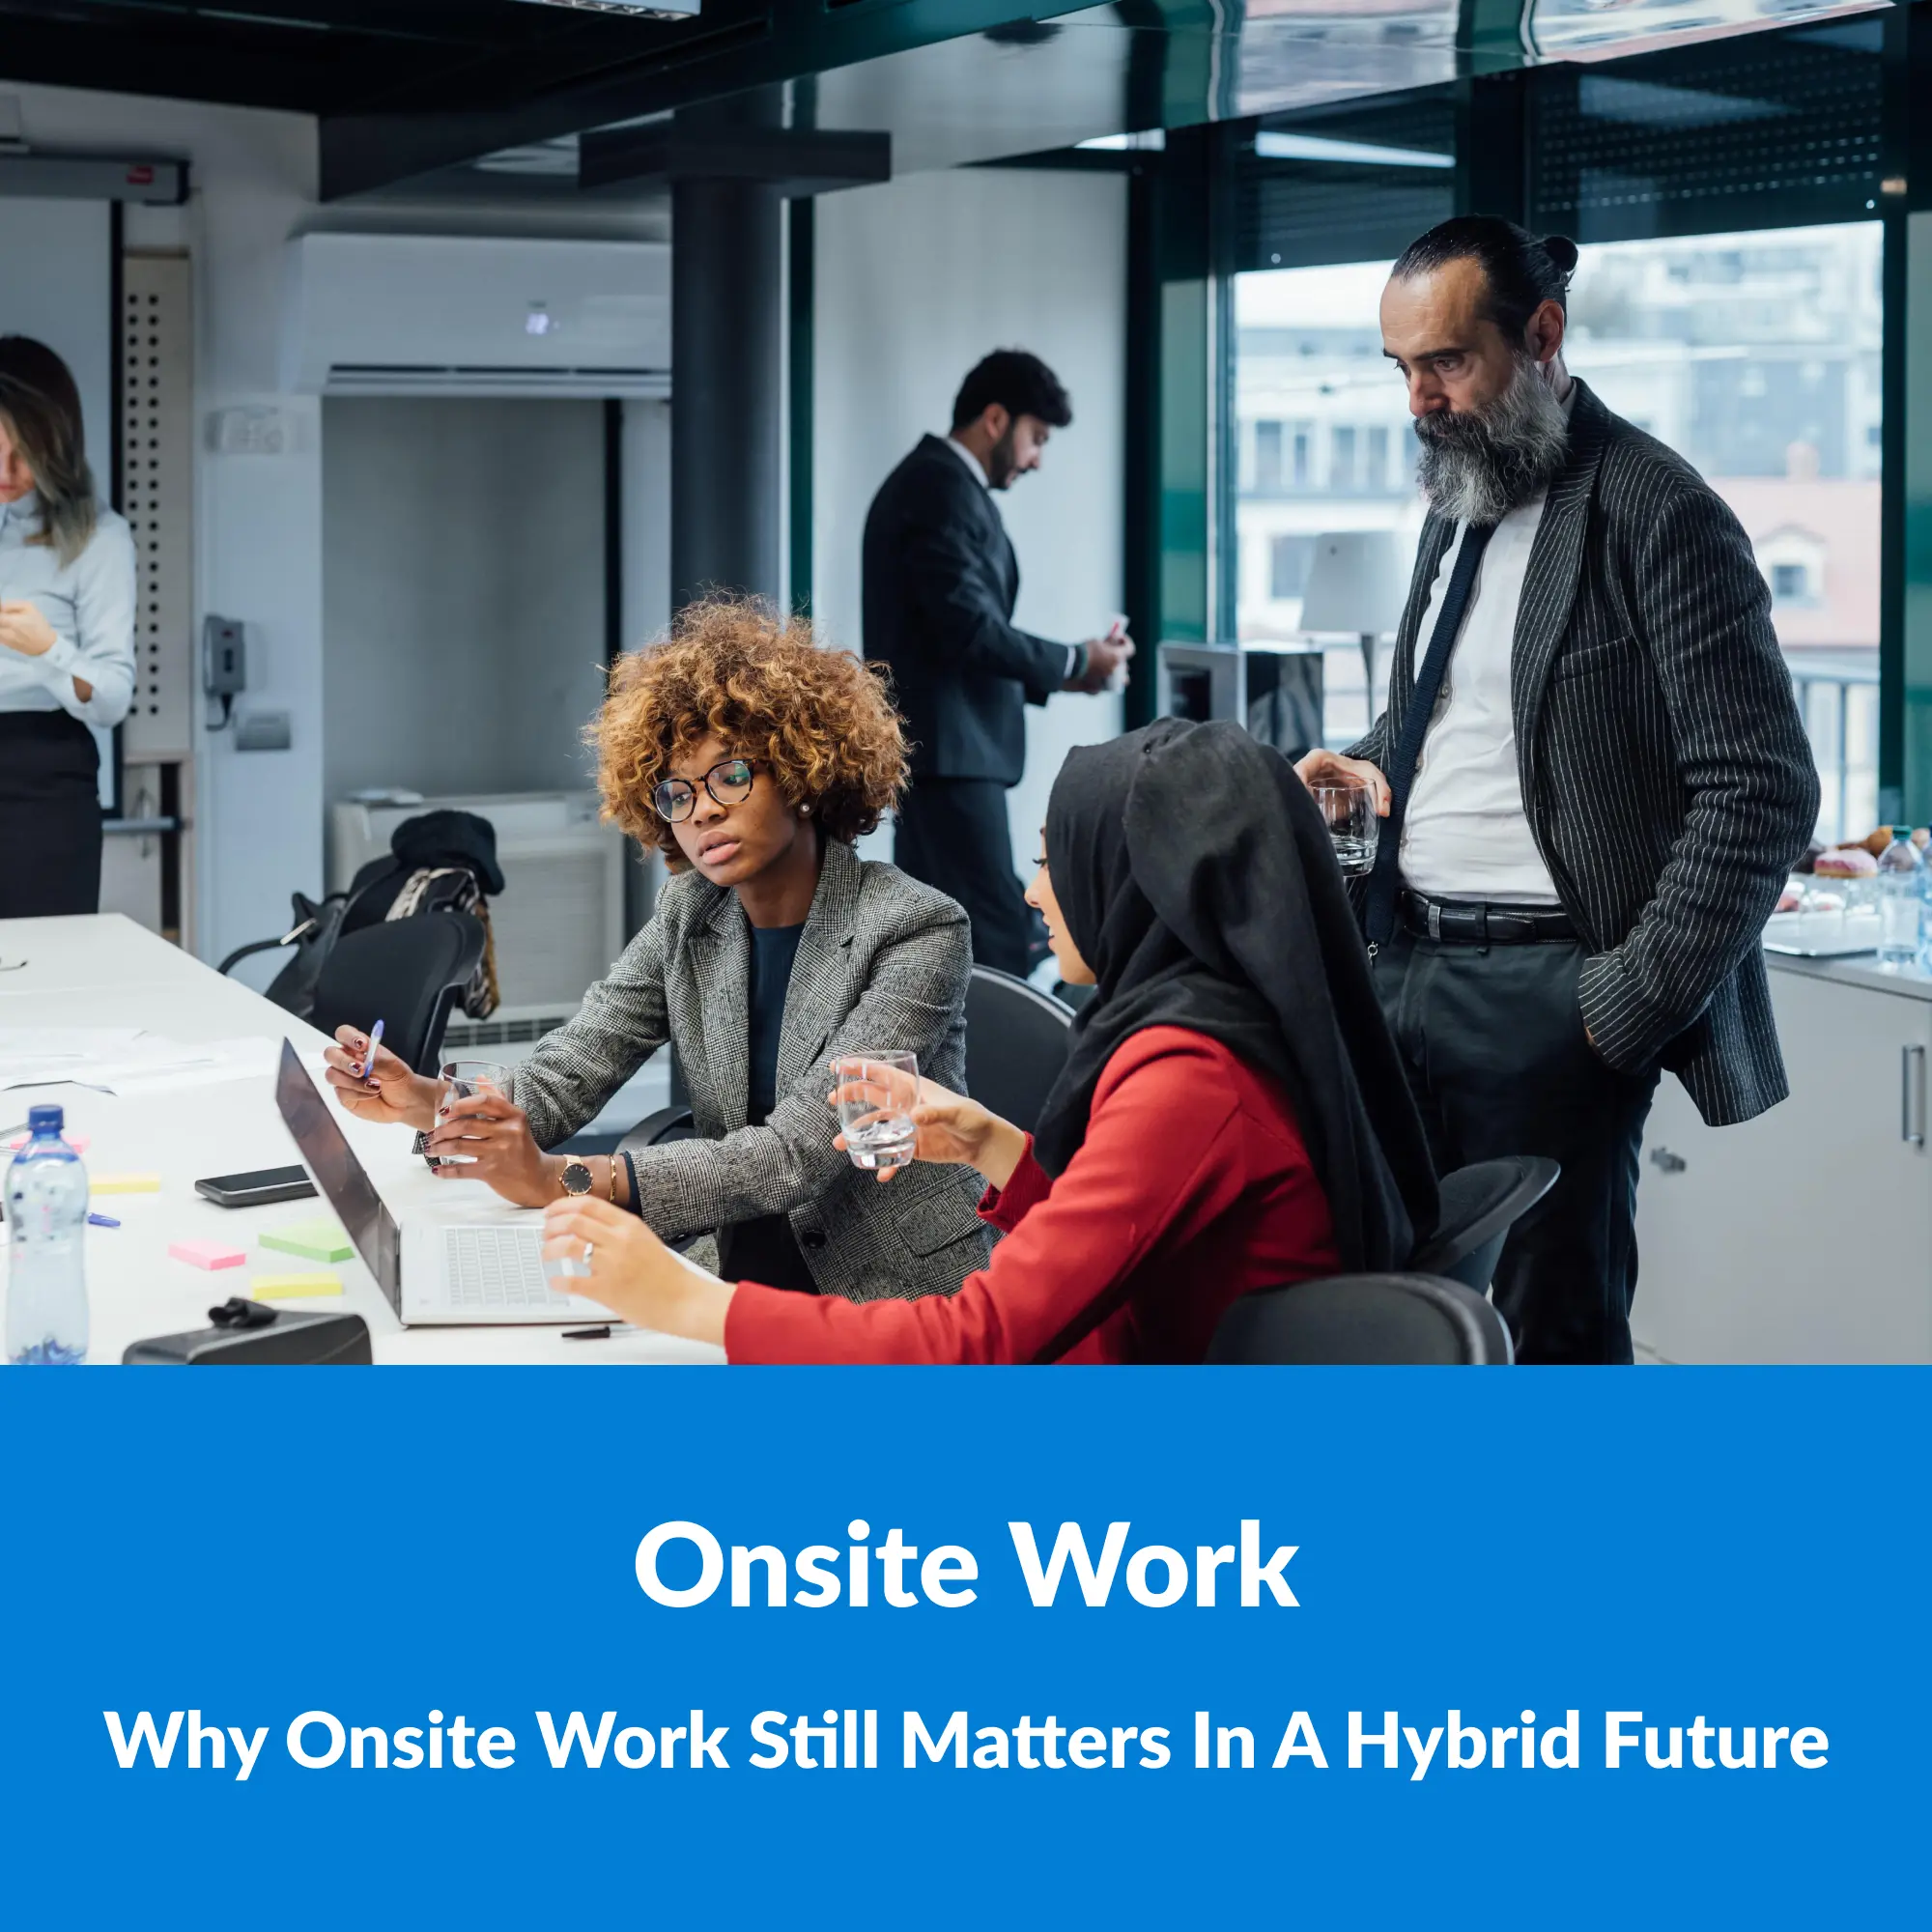 Why Onsite Work Still Matters in a Hybrid Future